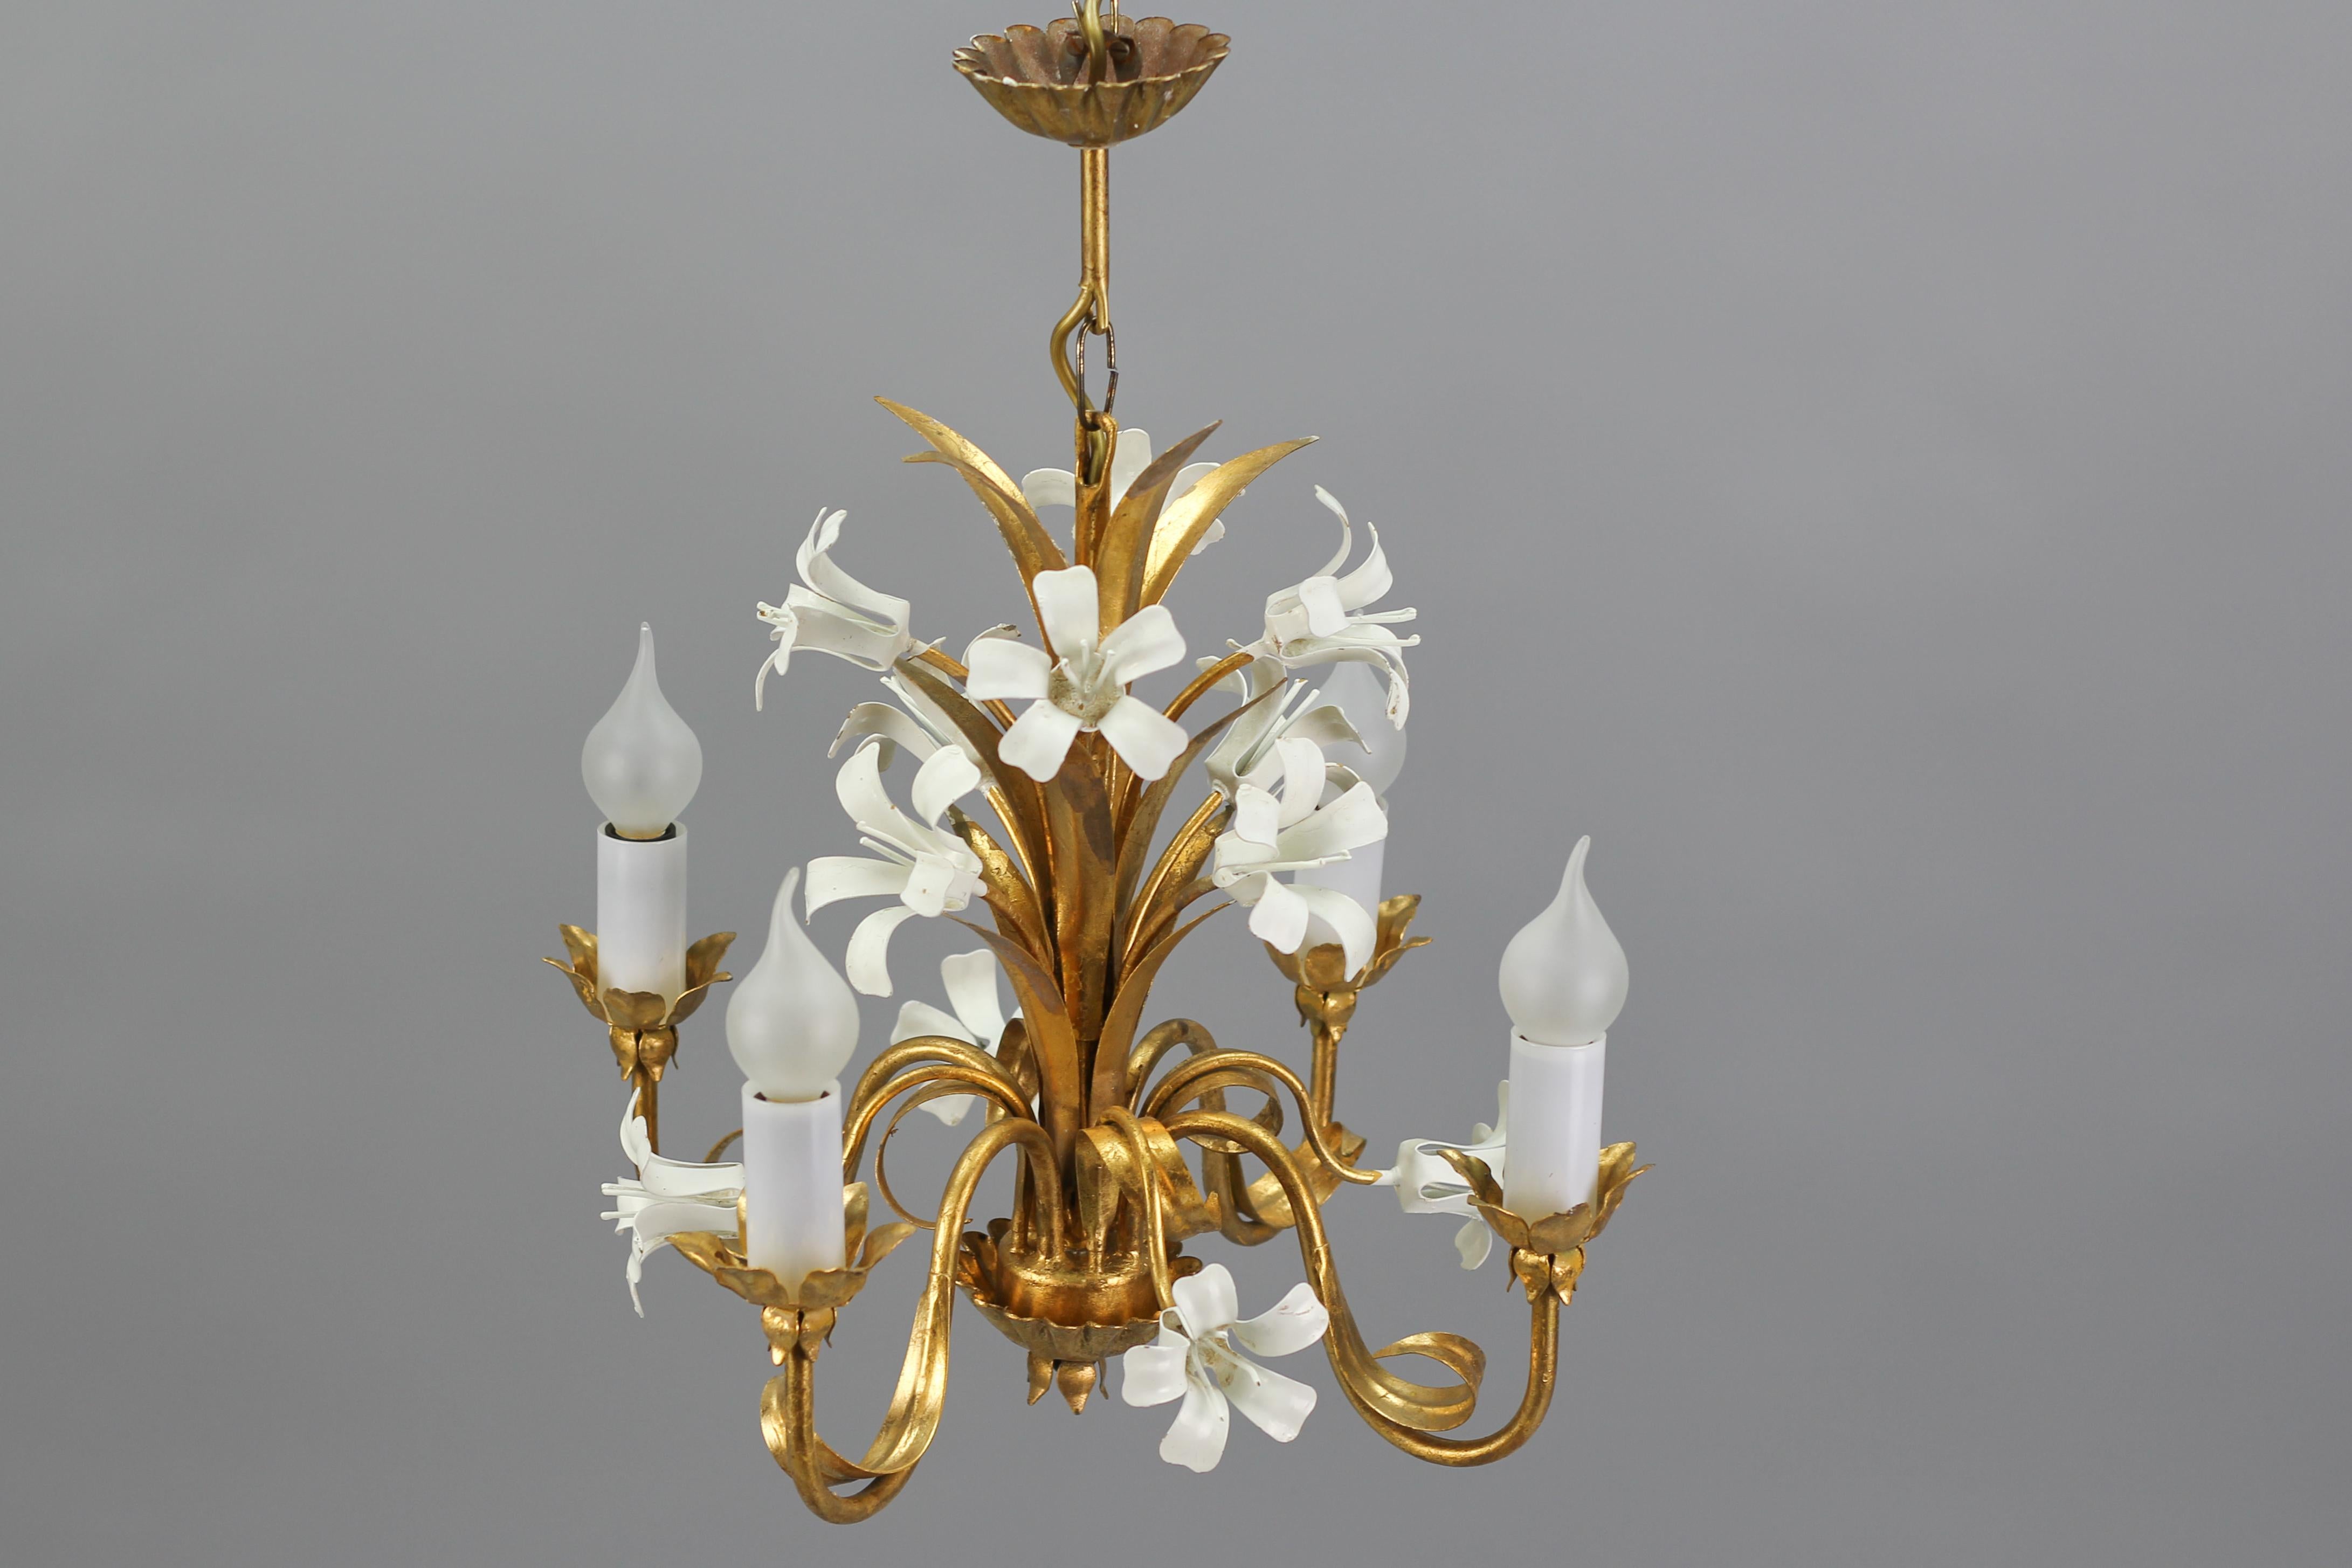 Hollywood Regency Style Gilt Metal Four-Light Chandelier with White Lily Flowers For Sale 1